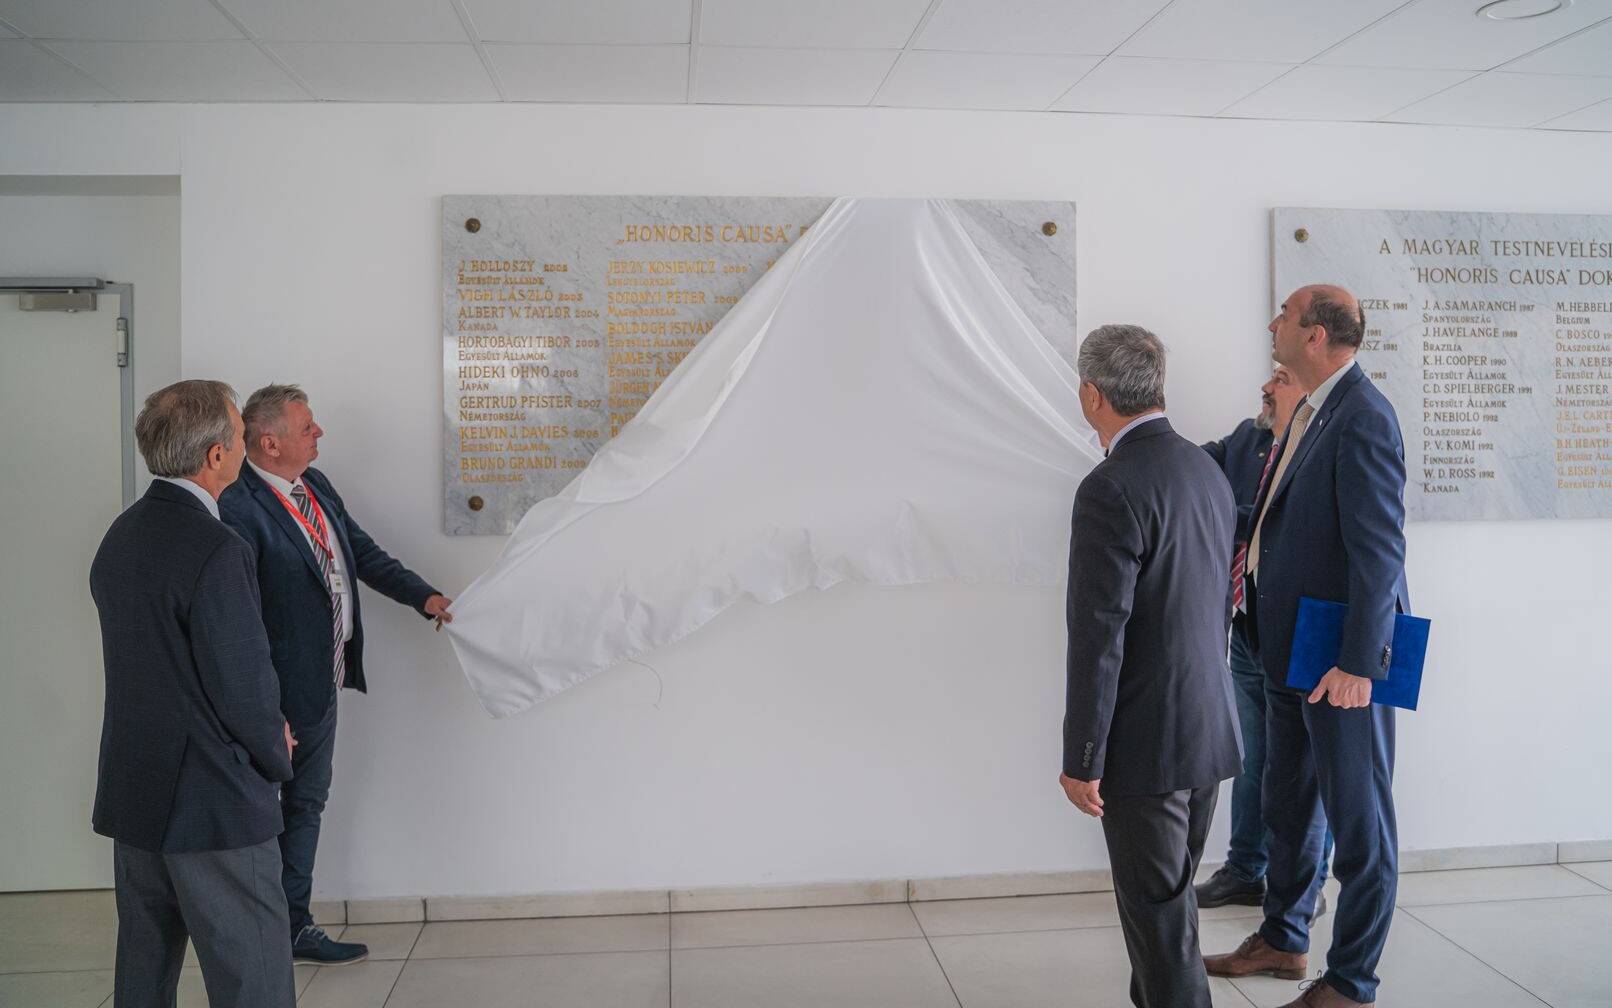 HUSS adds two more honorary doctors' name to the marble plaque